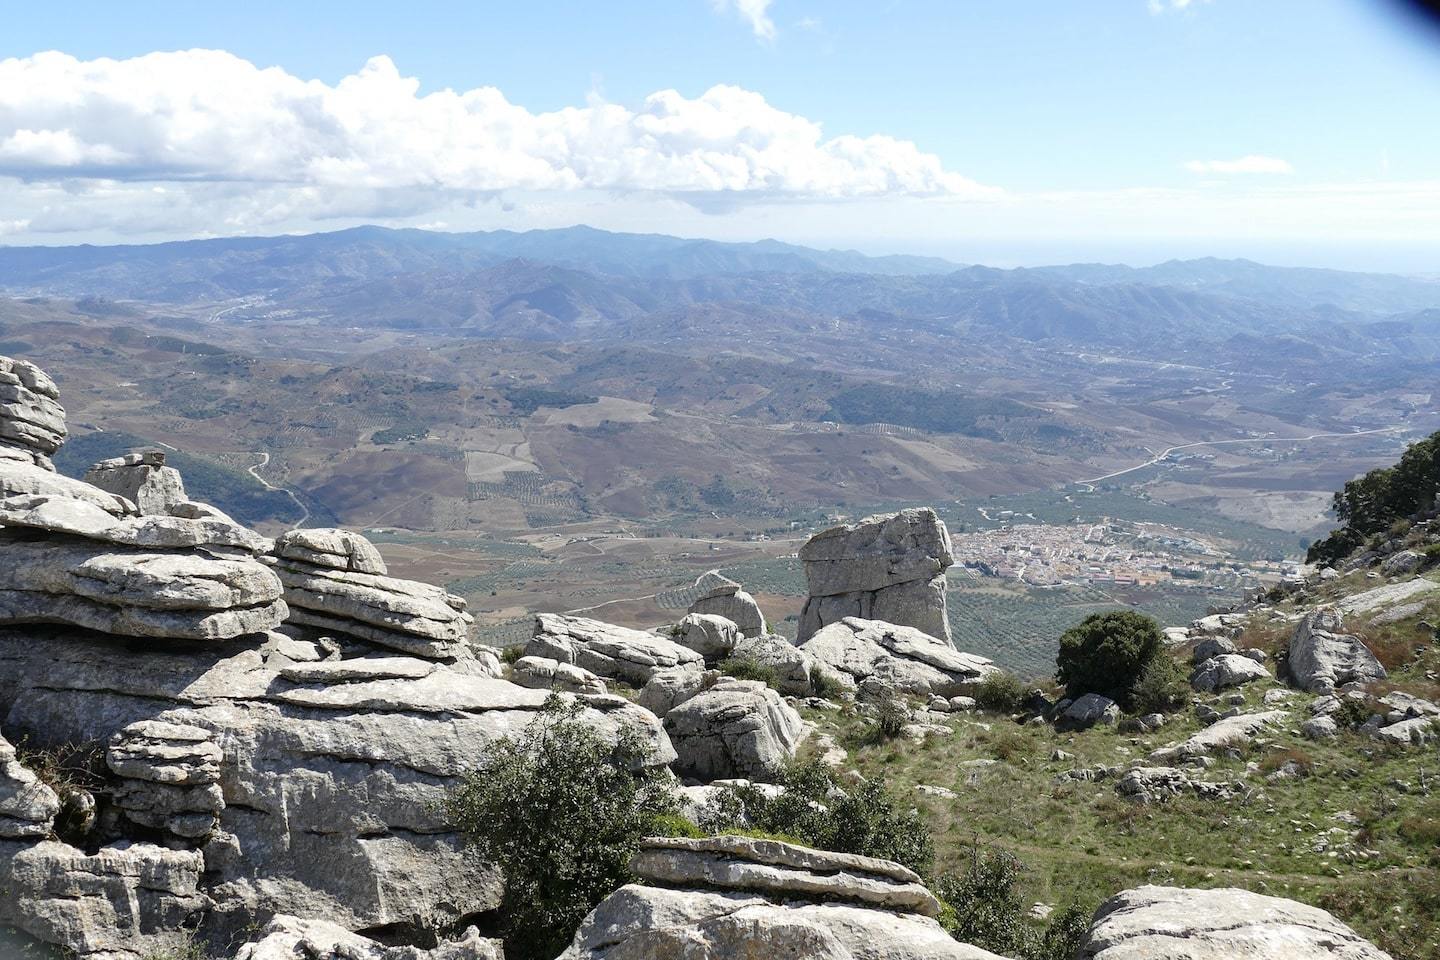 view from top of his with rock formations and mountains and towns in background